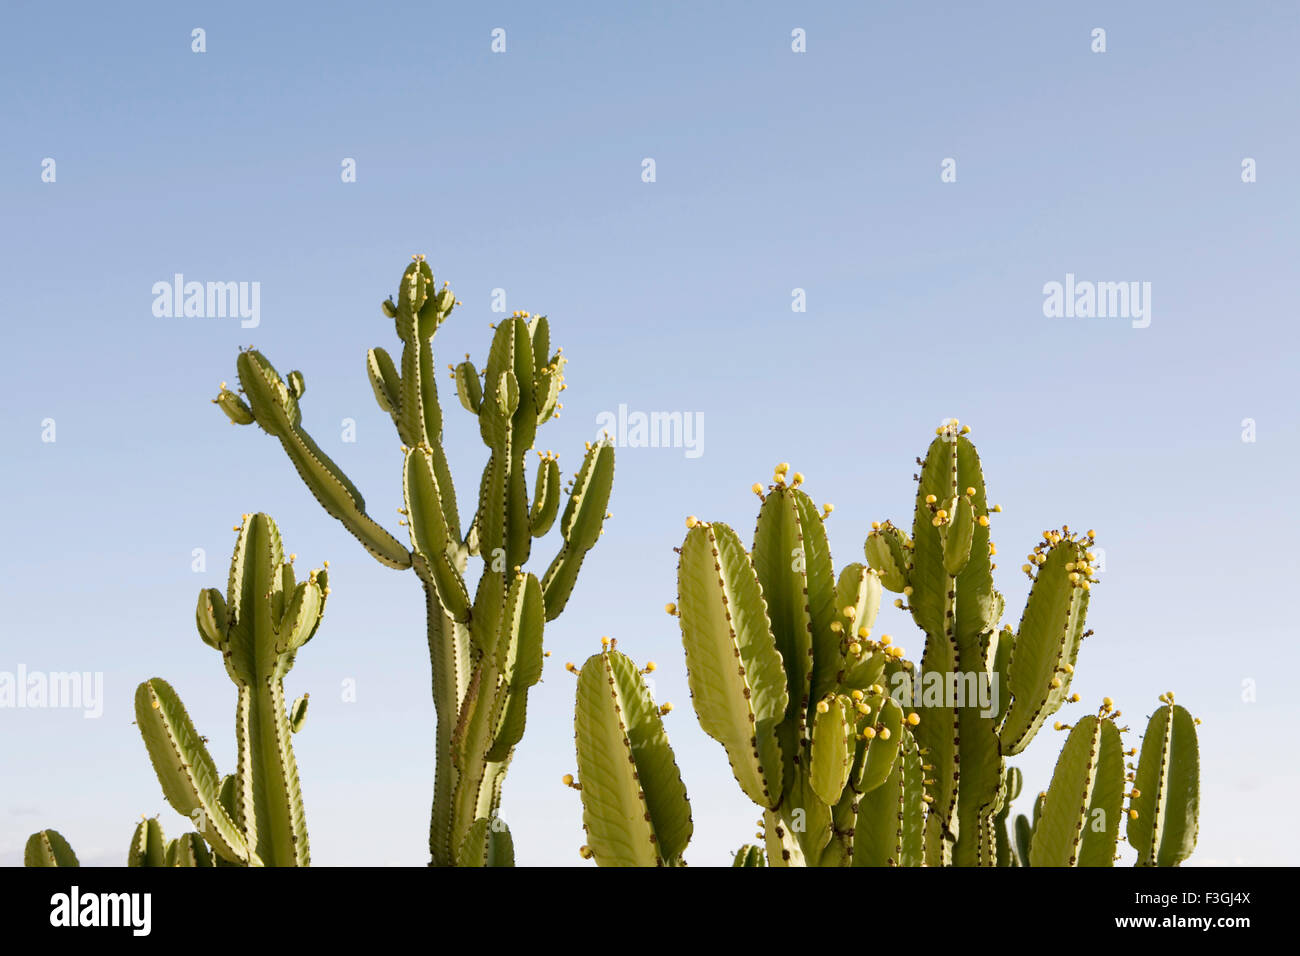 Cactus plant with fruits ; U.S.A. United States of America Stock Photo